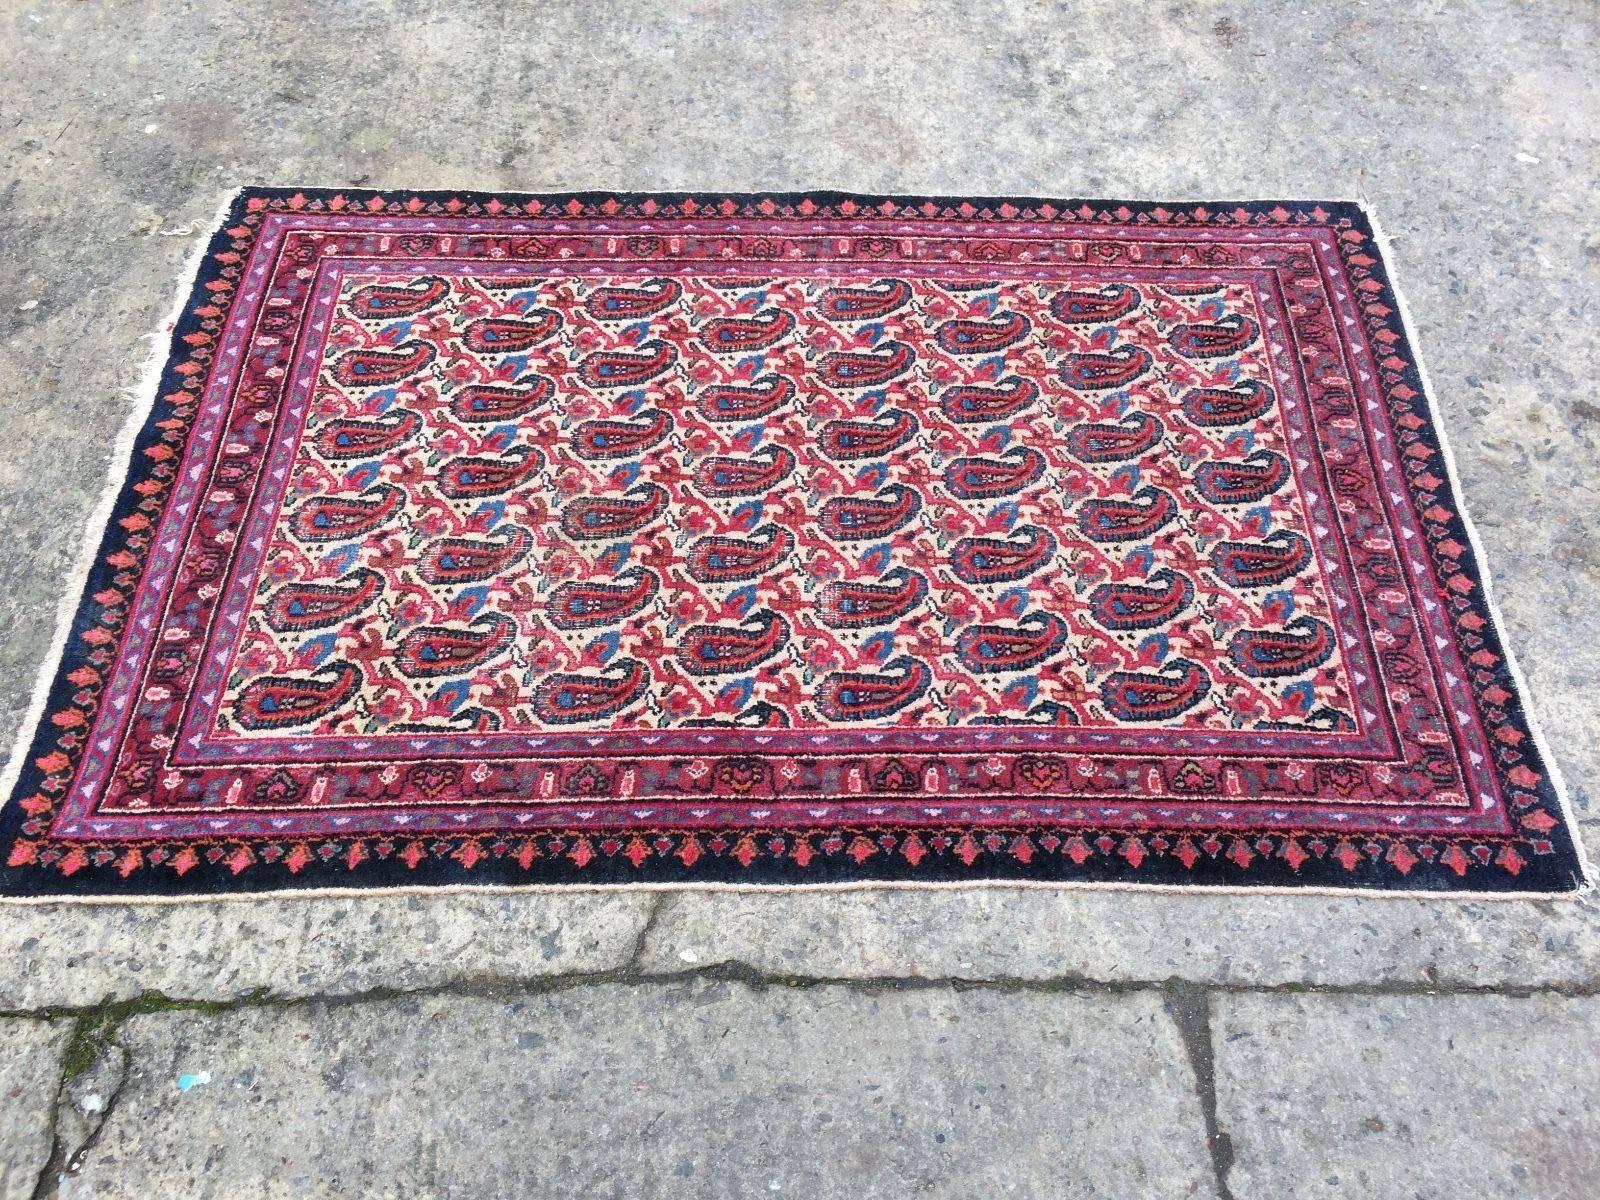 20th Century Kashan Rug Carpet 100% Wool Handwoven Reds For Sale